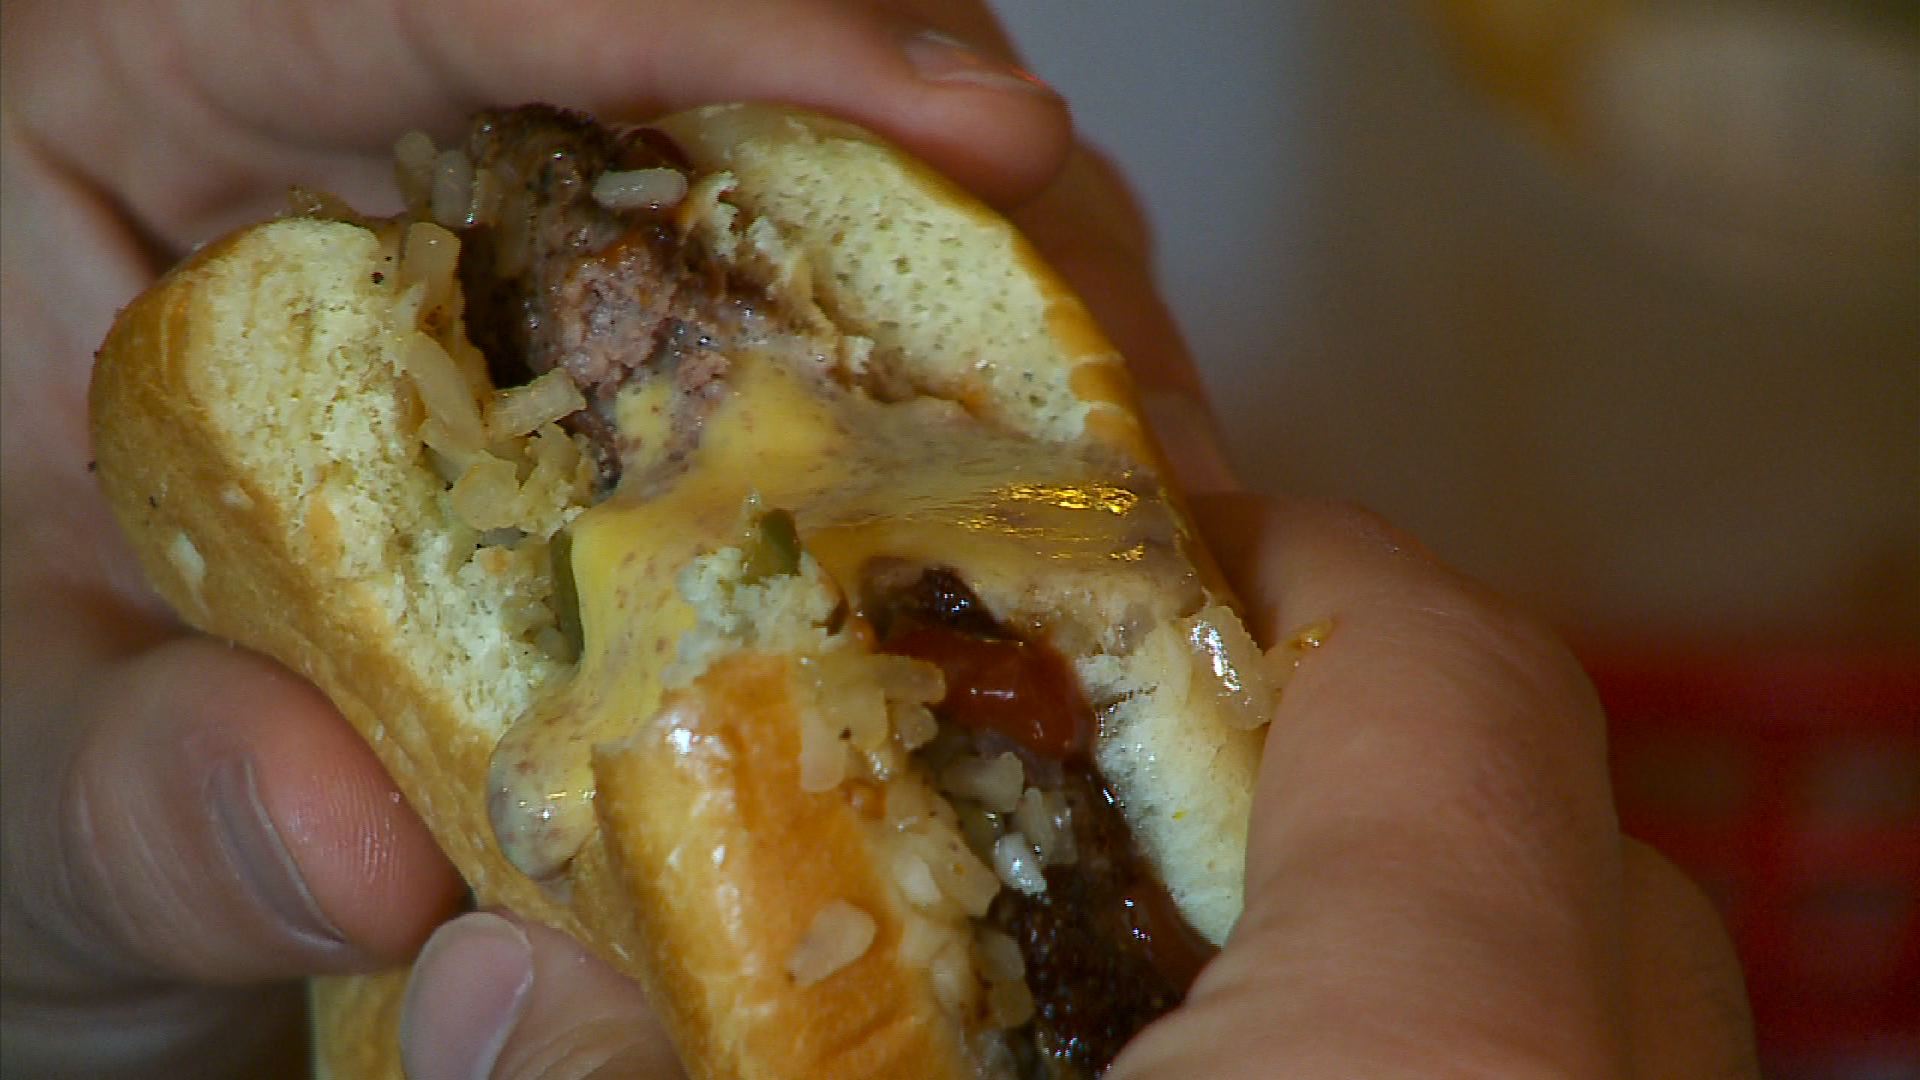 Matt’s Bar Serves Up Its Signature Jucy Lucy On ‘The Talk’ Competition